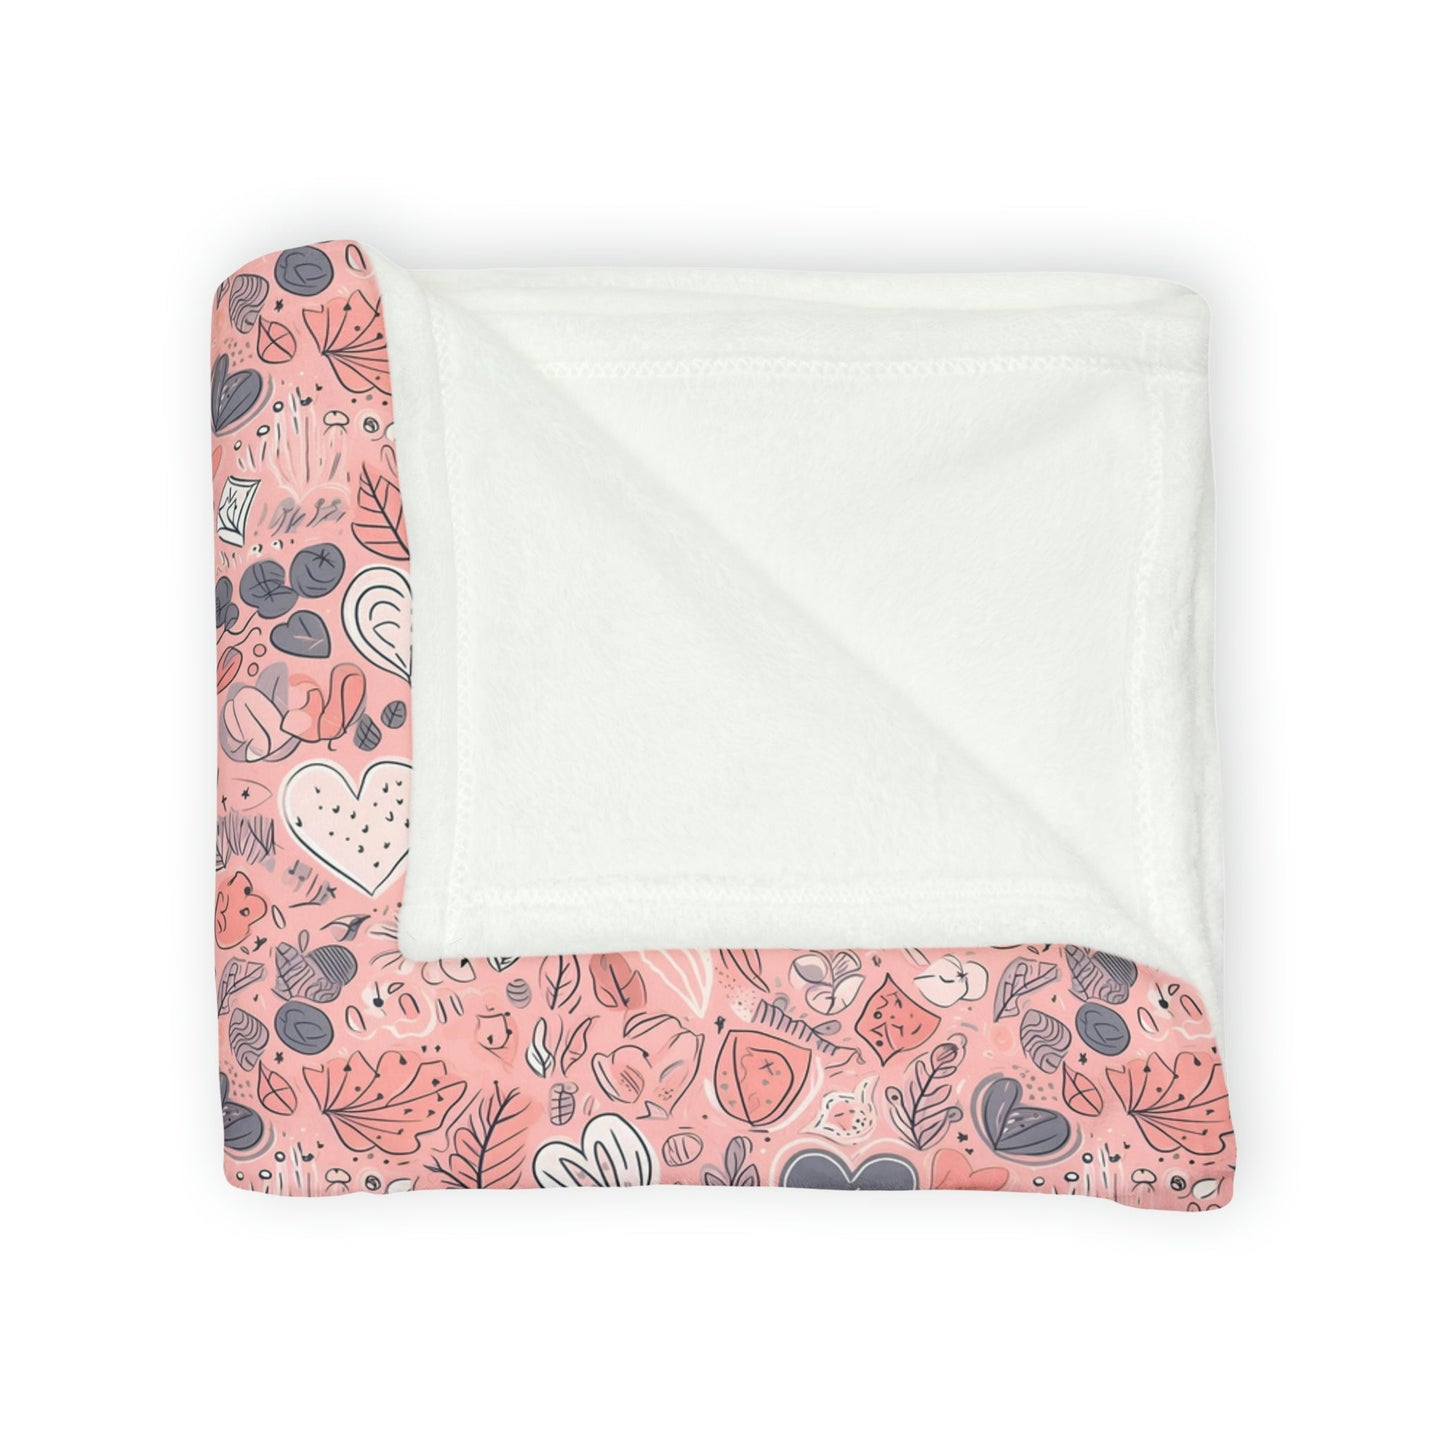 Springtime Blushing Hearts and Leaves - Whimsical Romance - Sofa Throws - Pattern Symphony